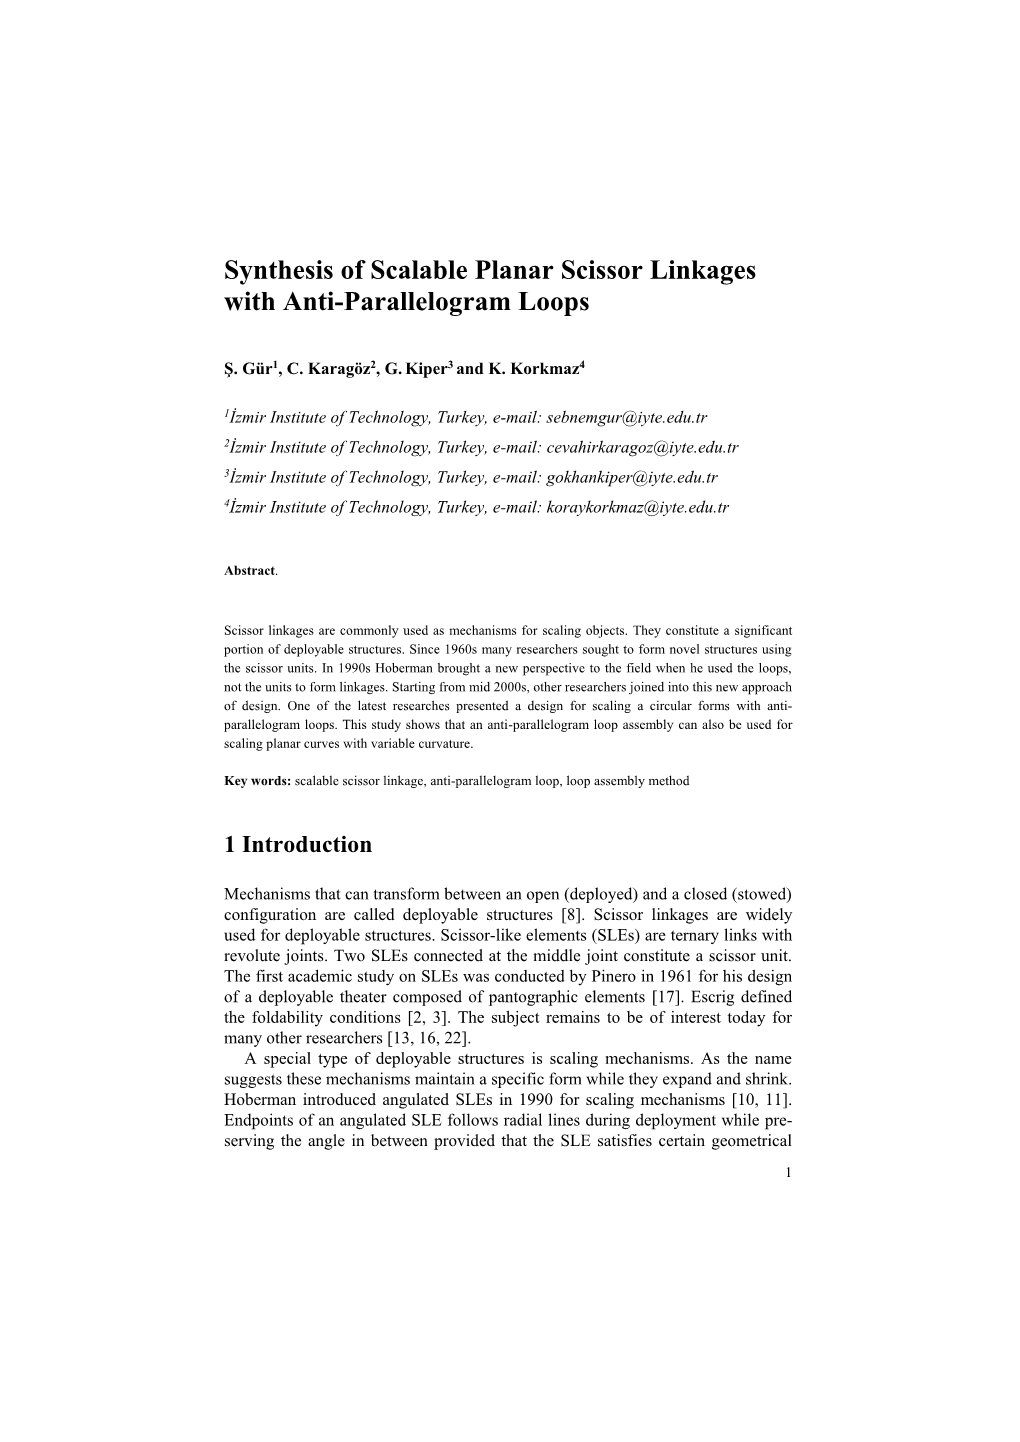 Latex Template for an EUCOMES 2010 Paper